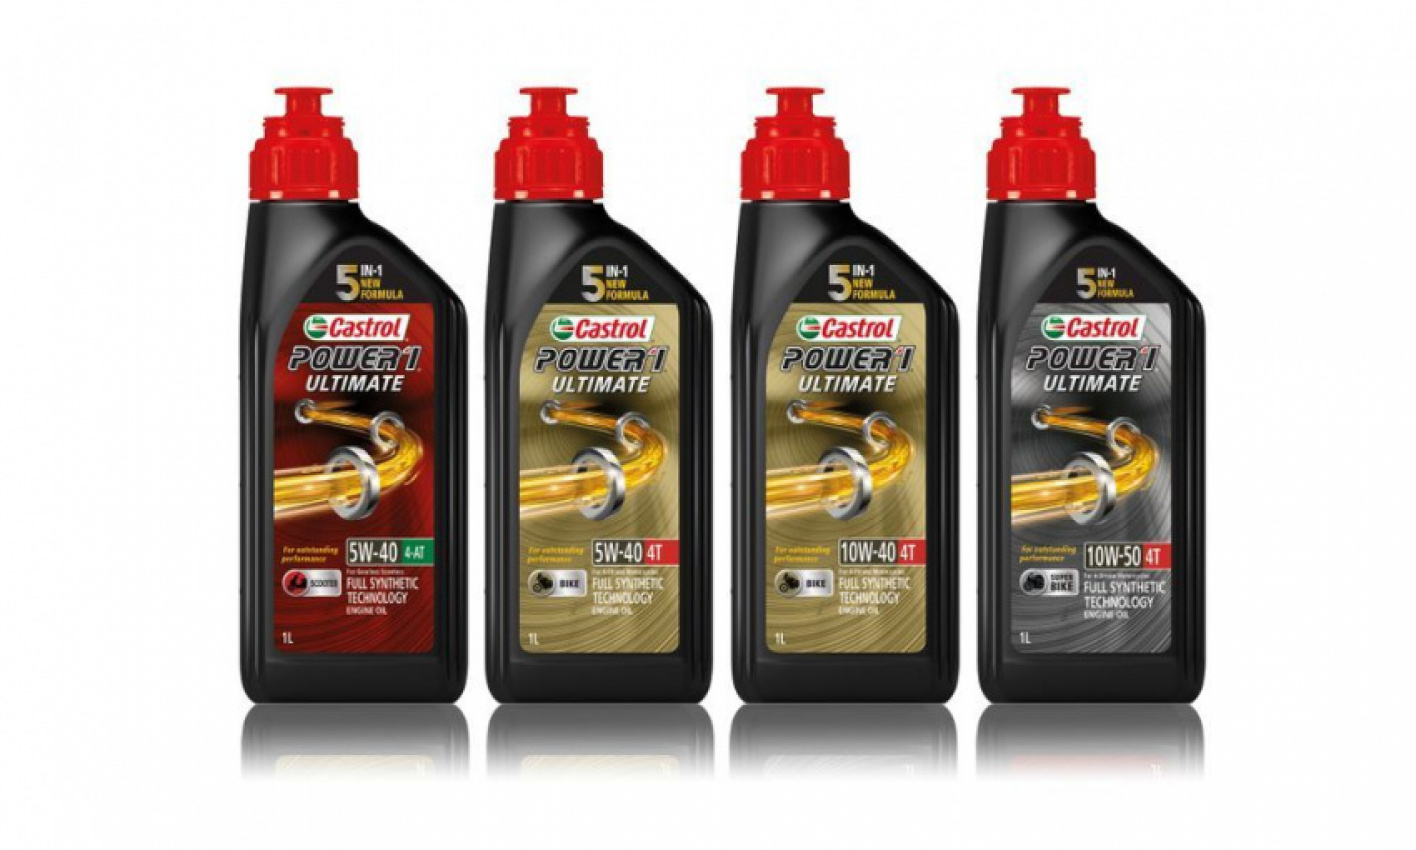 autos, cars, auto news, castrol biking, castrol malaysia, castrol motorcycles, castrol power 1 ultimate, castrol launches power1 ultimate engine oil, designed for those who want more from their bikes